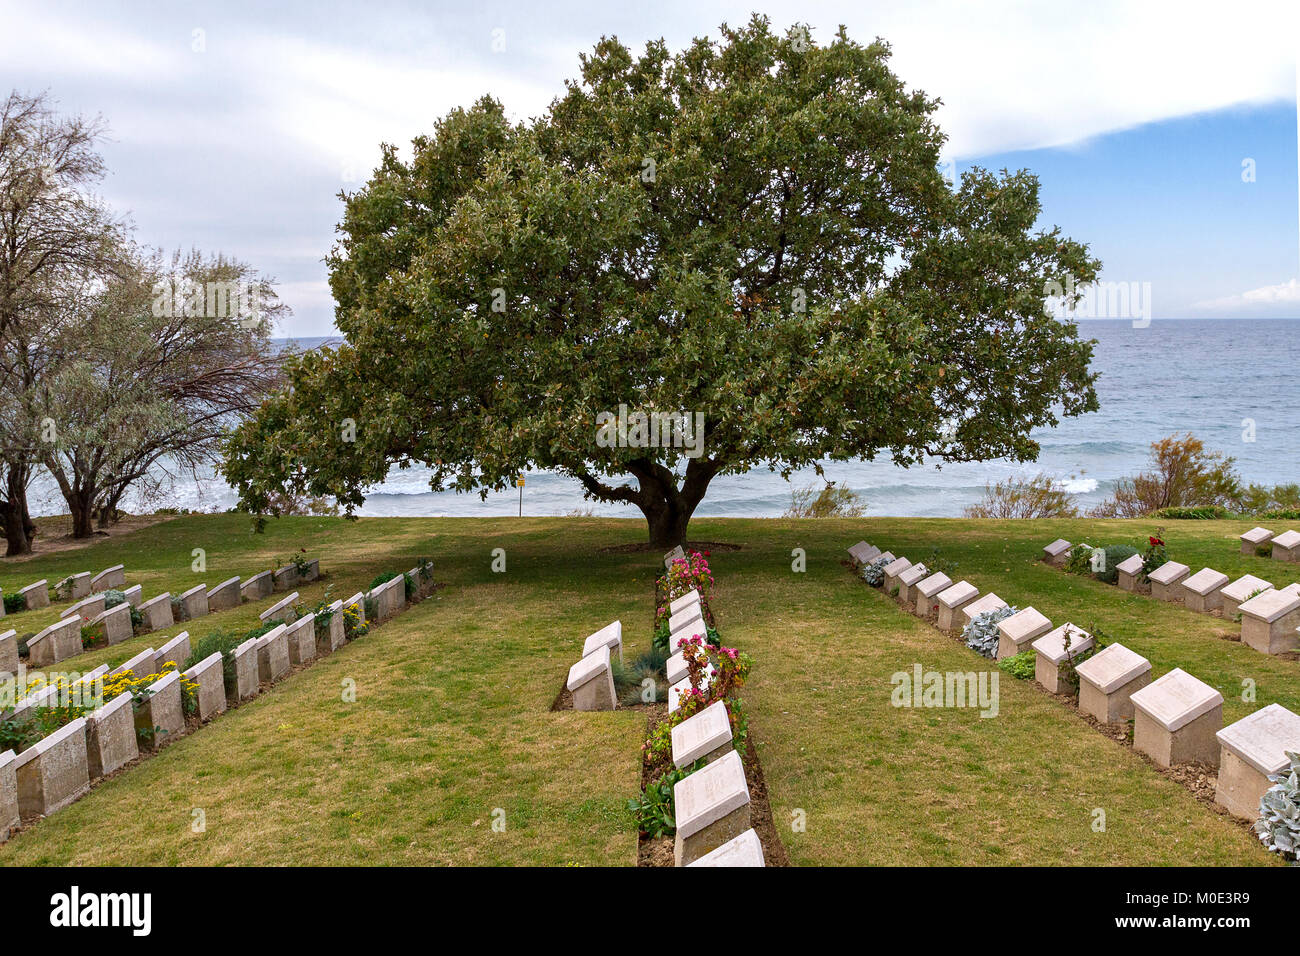 Beach Cemetery at the Anzac Cove, Gallipoli, Canakkale, Turkey, which contains the remains of allied troops who died during the Battle of Gallipoli. Stock Photo